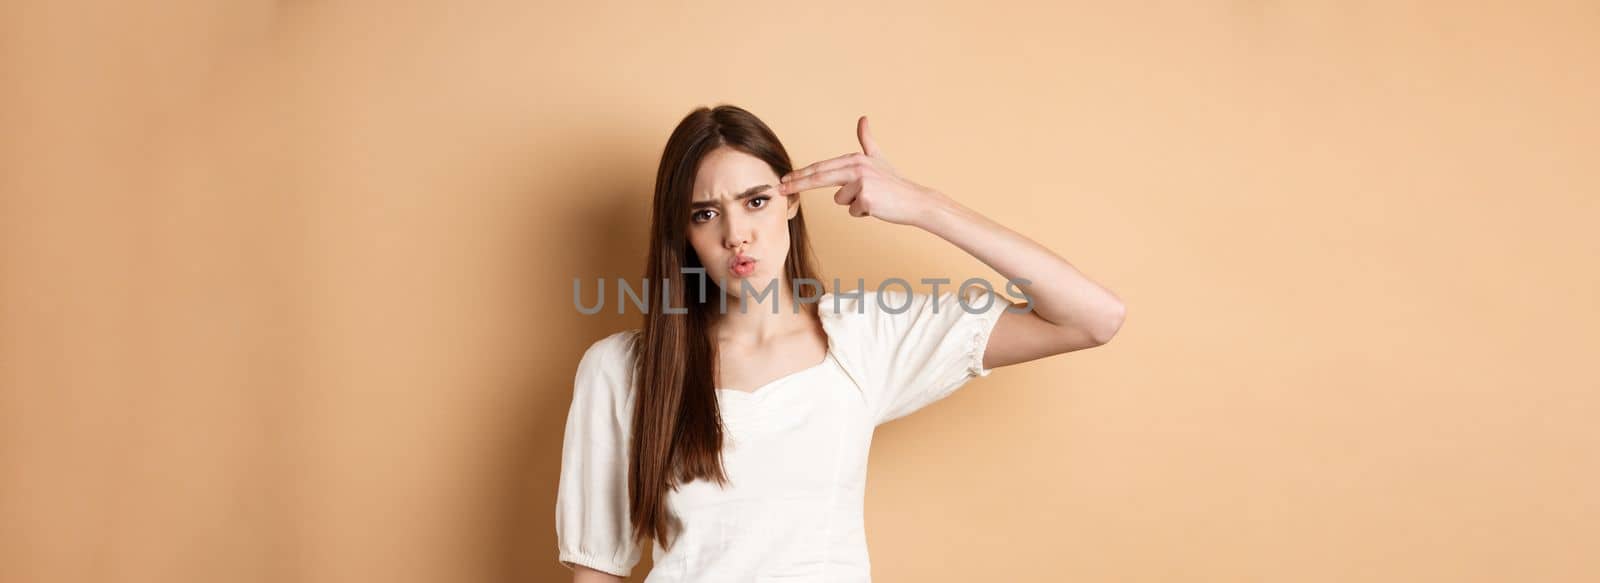 Just kill me. Annoyed and distressed young woman making finger gun sign on ver head and frowning bothered, standing pissed-off on beige background.